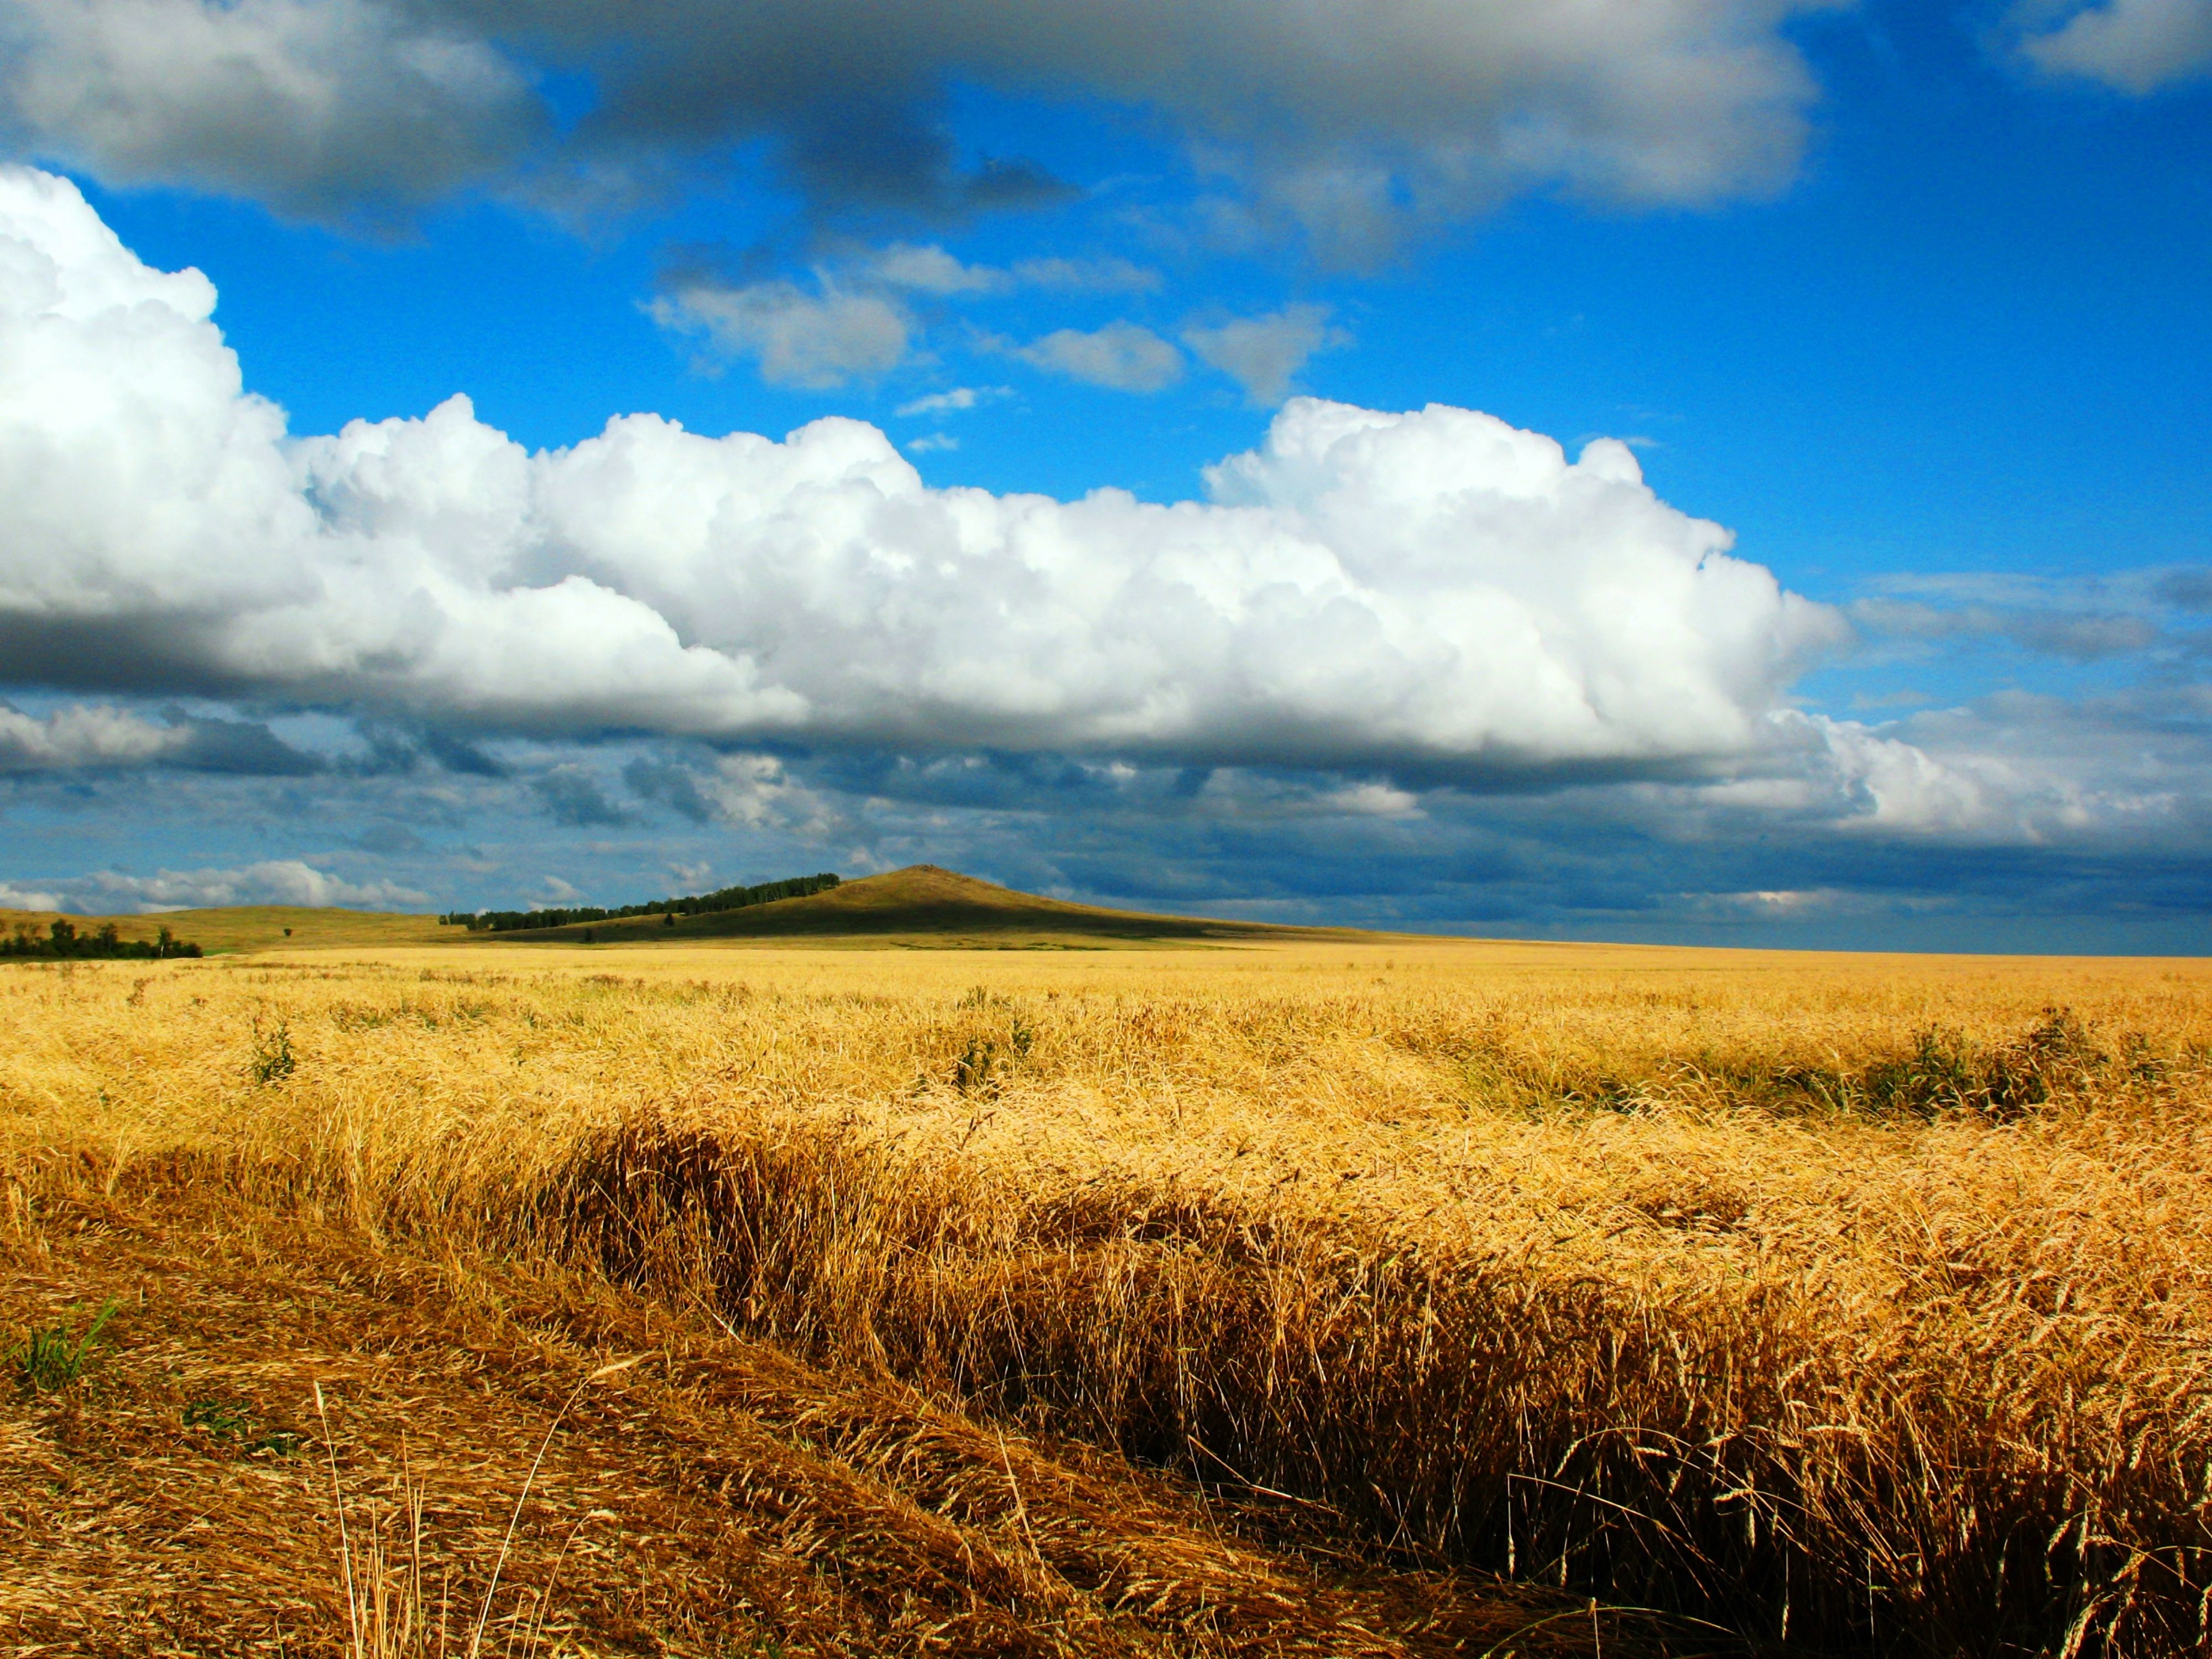 Download wallpaper 4000x3000 field, wheat, autumn, cleaning